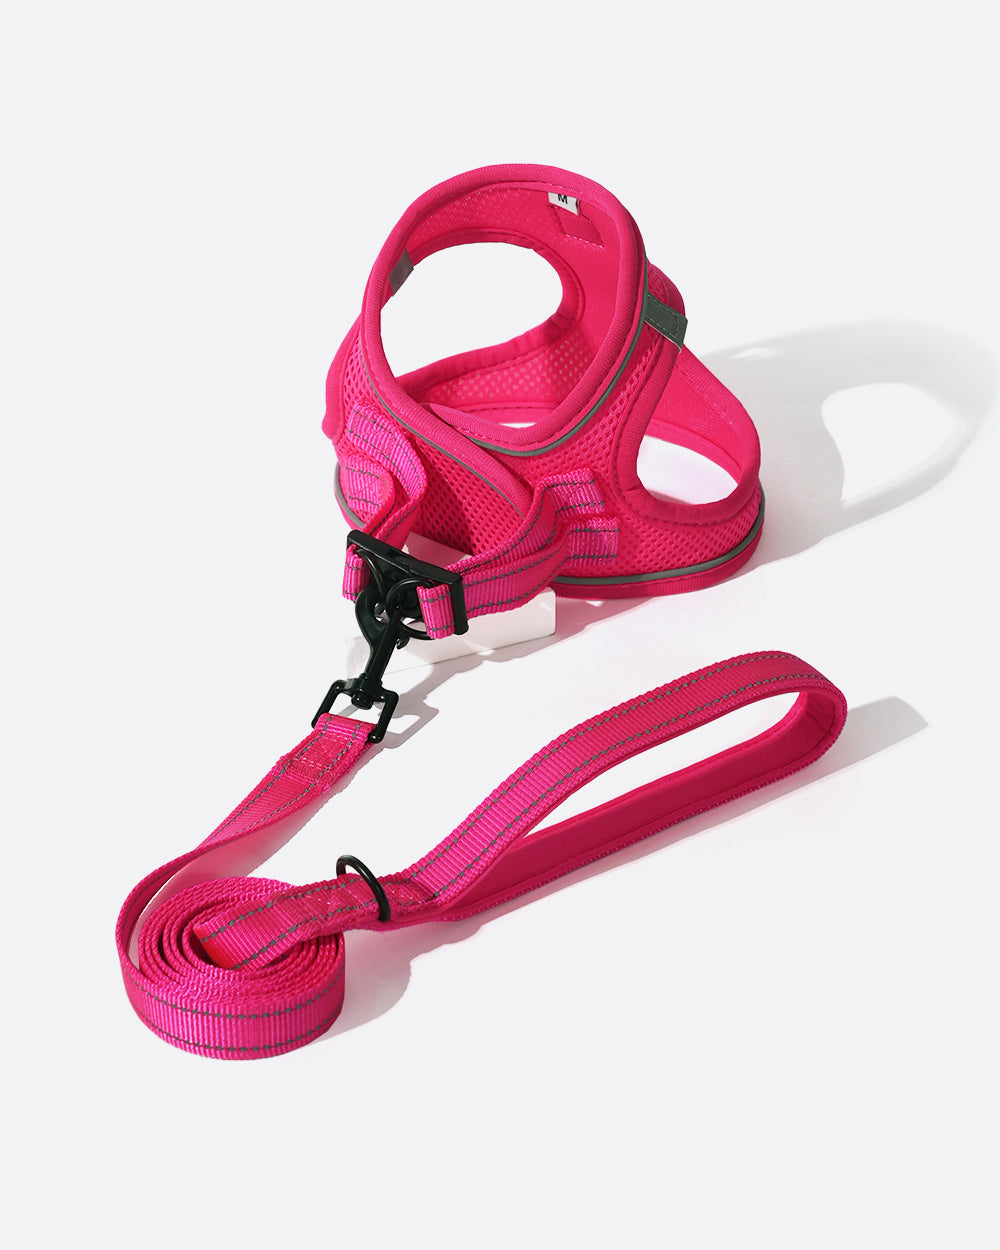 Take the hassle out of daily walks with your dog with this easy-to-use mesh harness featuring a swivel buckle and velcro strap, paired with a matching leash that has a 360 rotating clasp and reflective stitching for added safety.